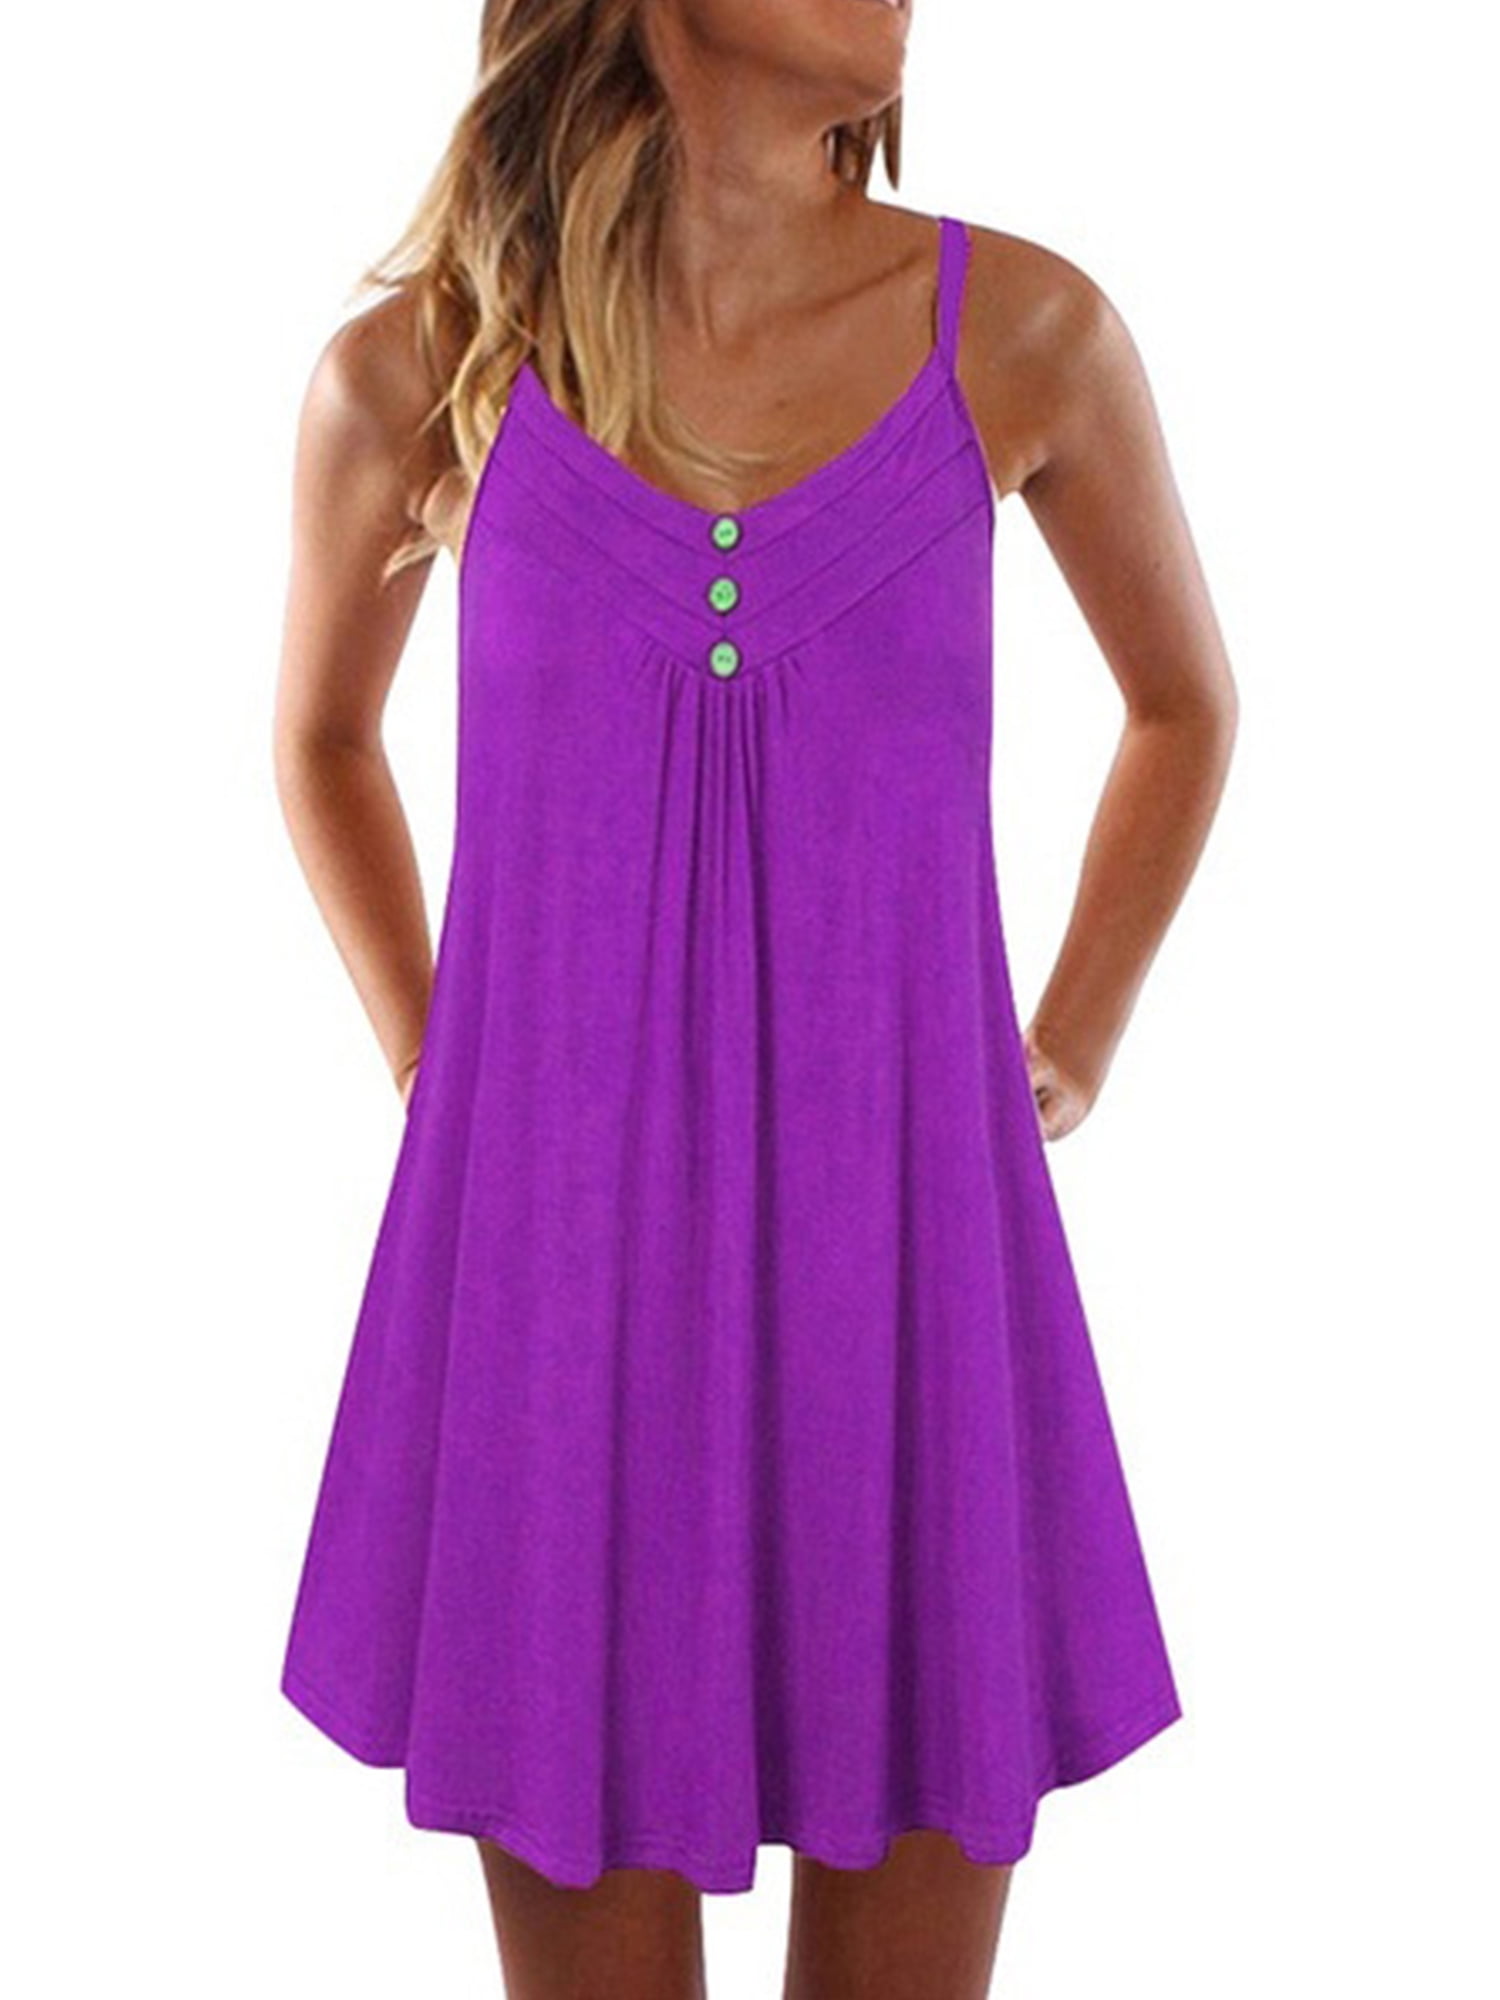 Women's Fashion Loose Casual Pure Color Sleeveless Plus Size Camisole Summer Tank Dress